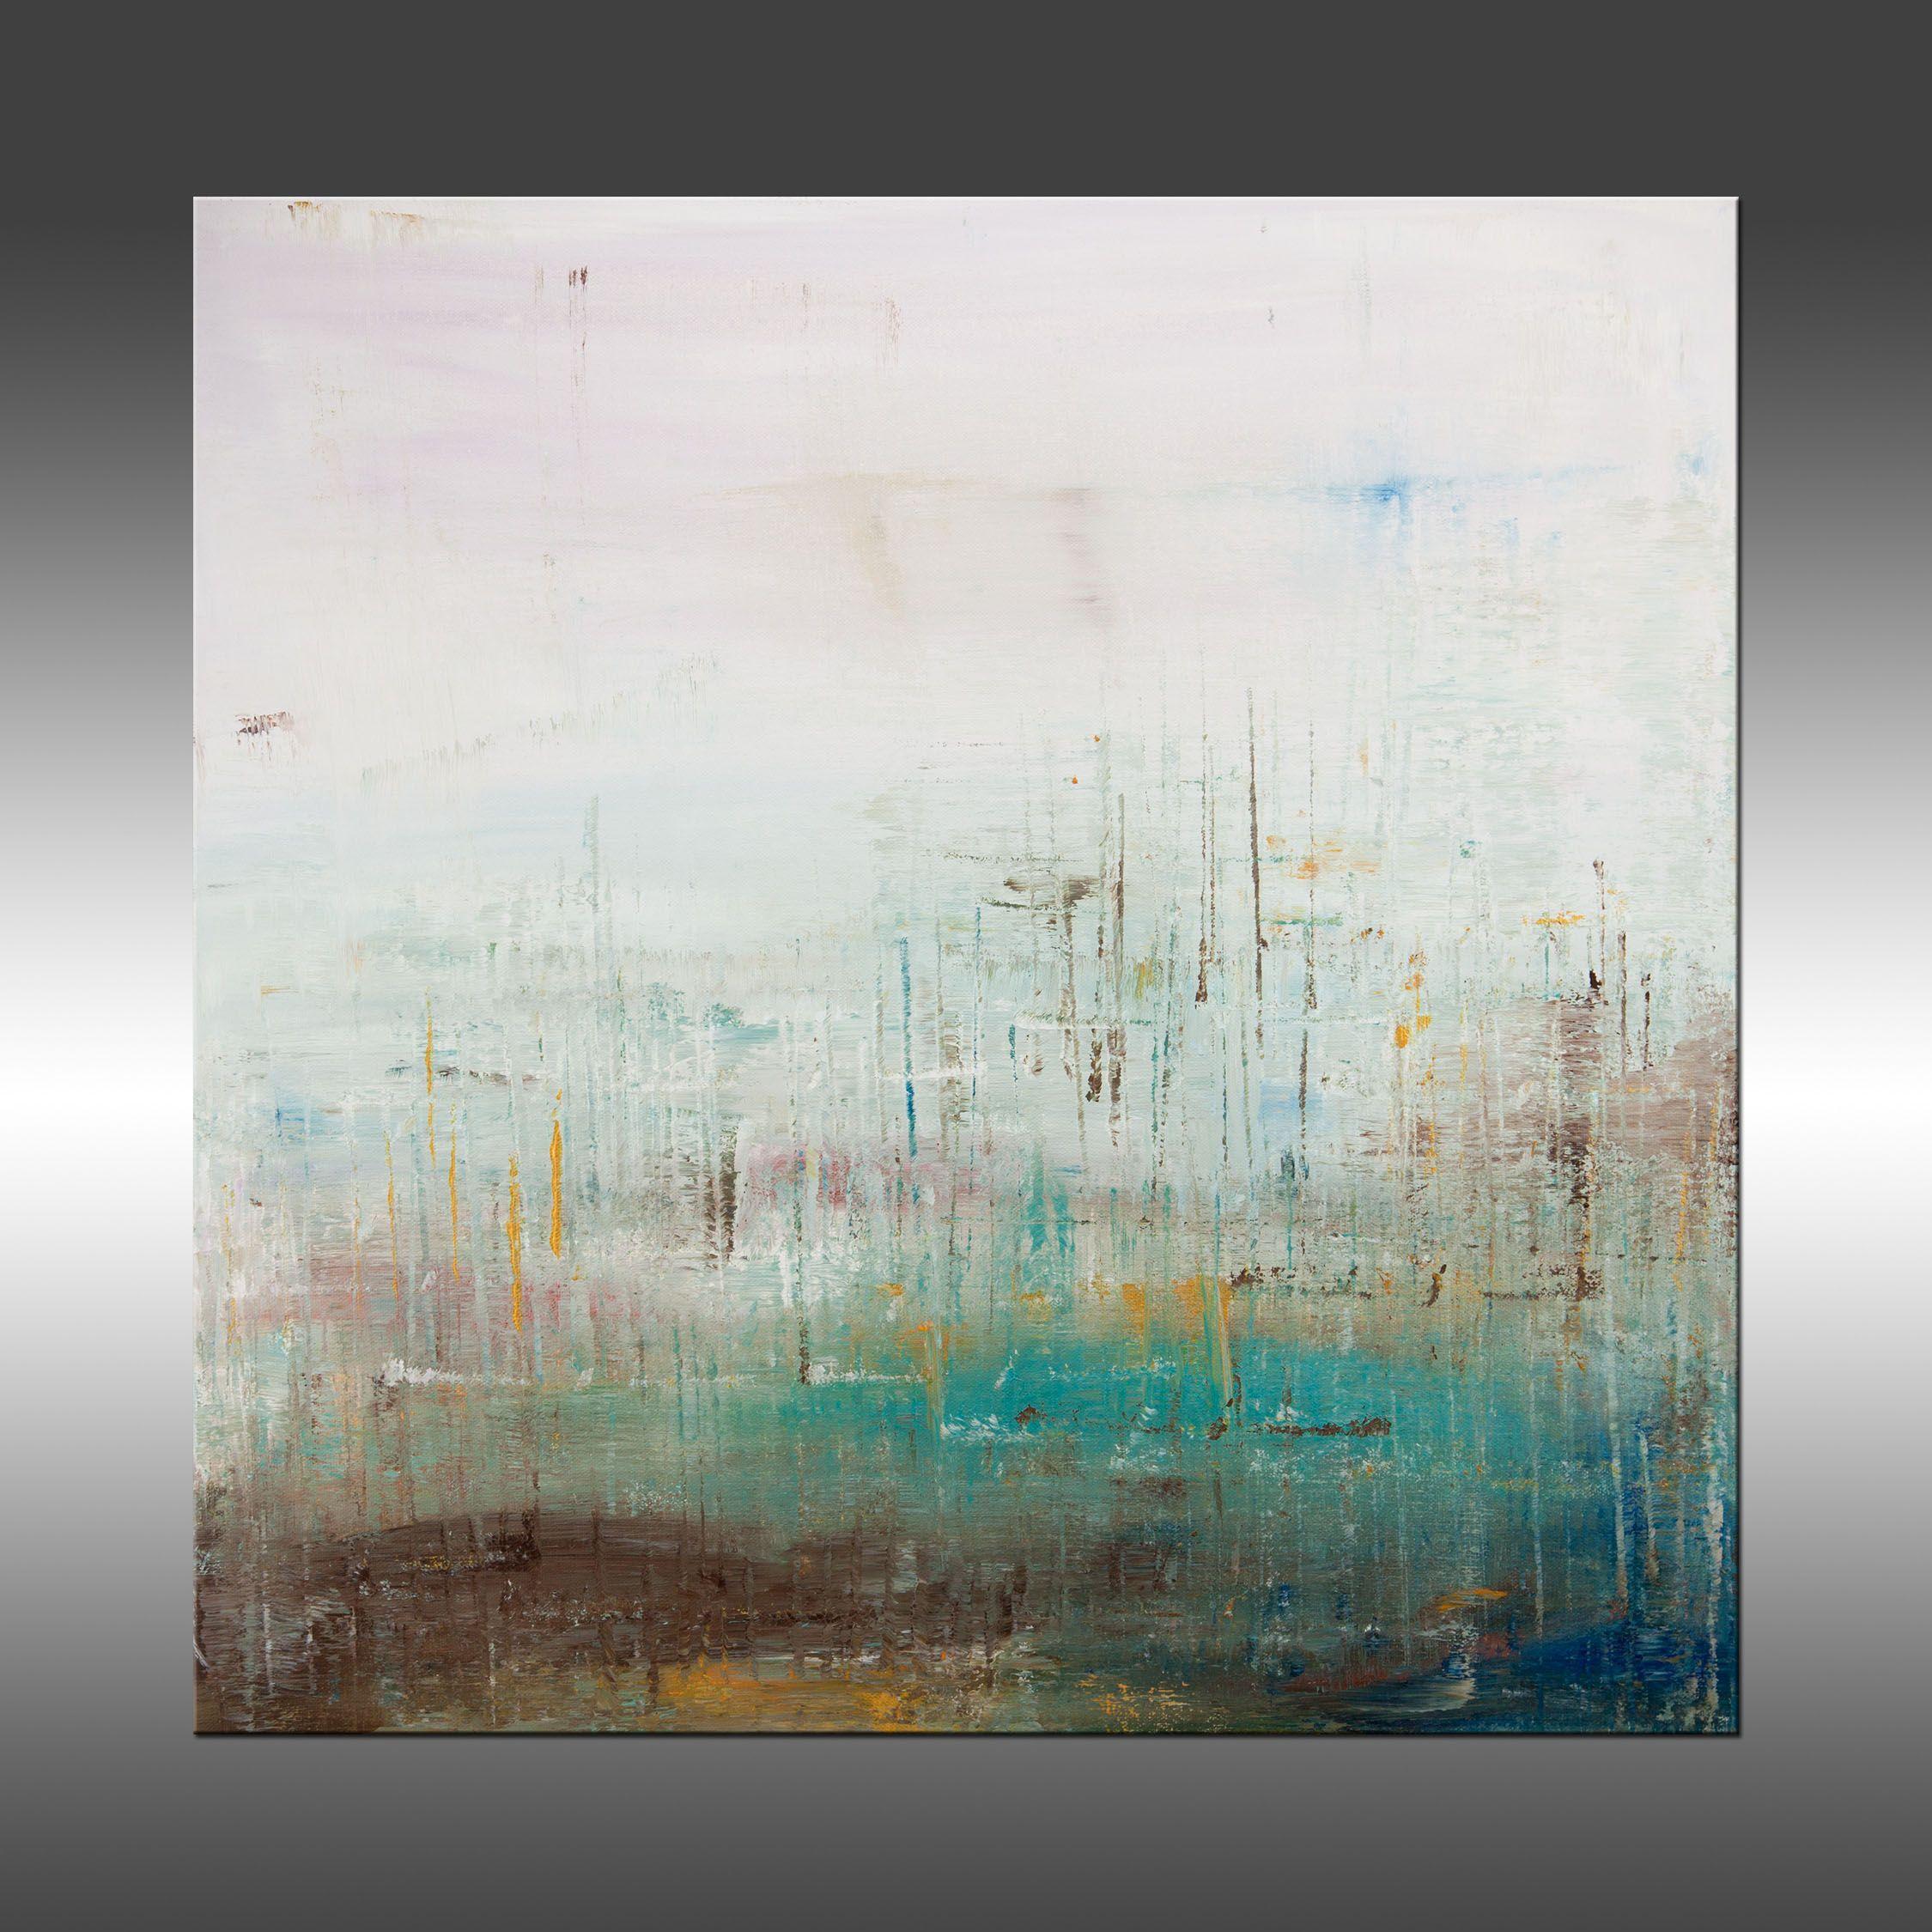 Salt Marsh is an original painting, created with acrylic paint on gallery-wrapped canvas. It has a width of 24 inches and a height of 24 inches with a depth of 1.5 inches (24x24x1.5).    The colors used in the painting are white, brown, blue, teal,